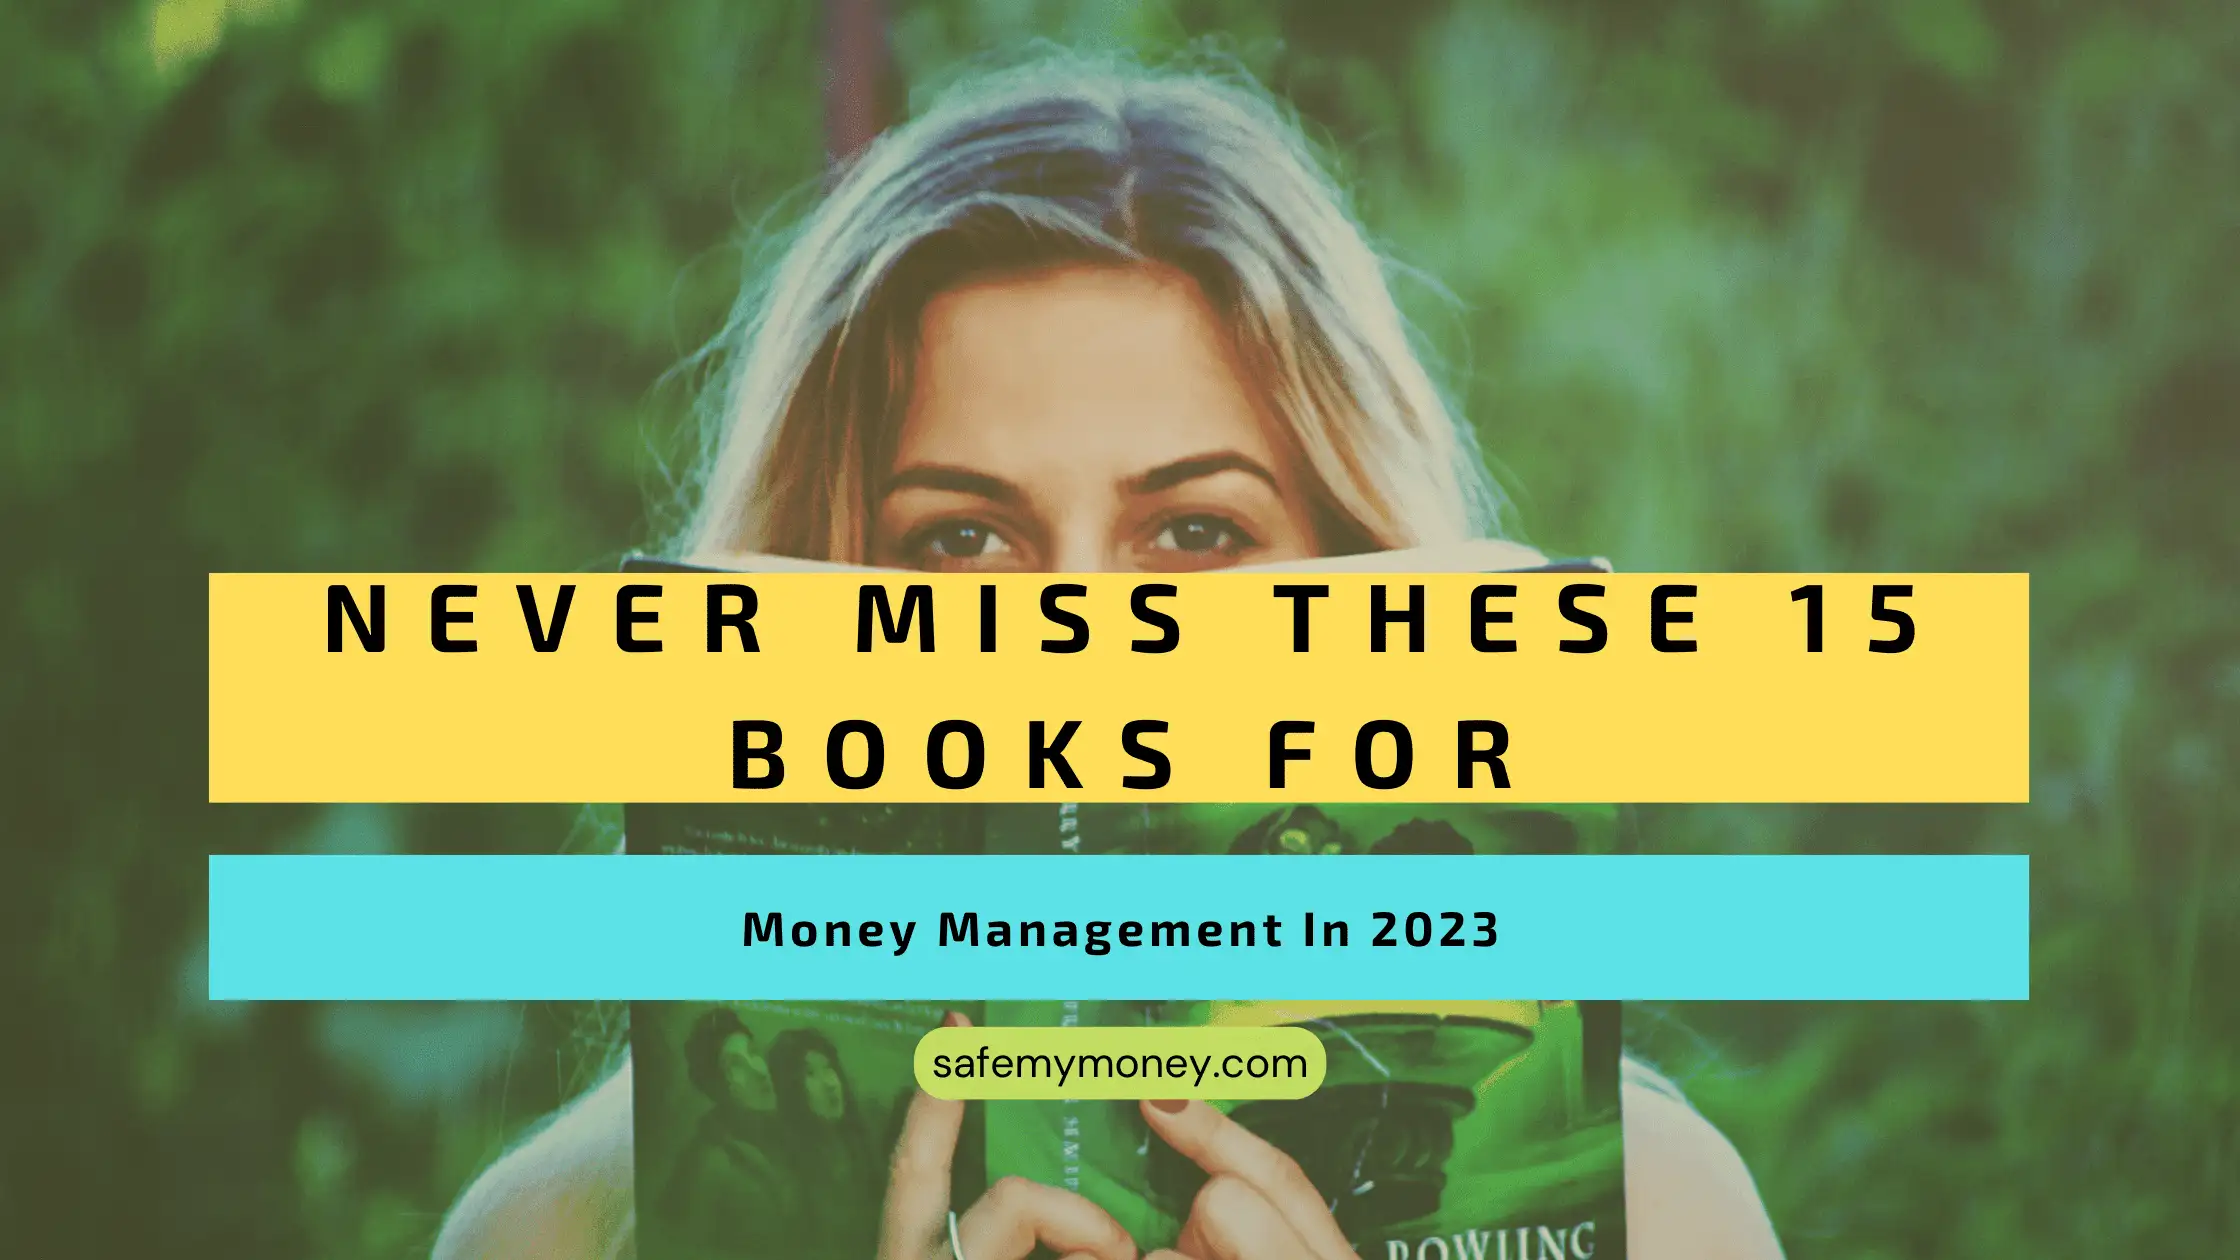 Never Miss These 15 Books For Money Management In 2023